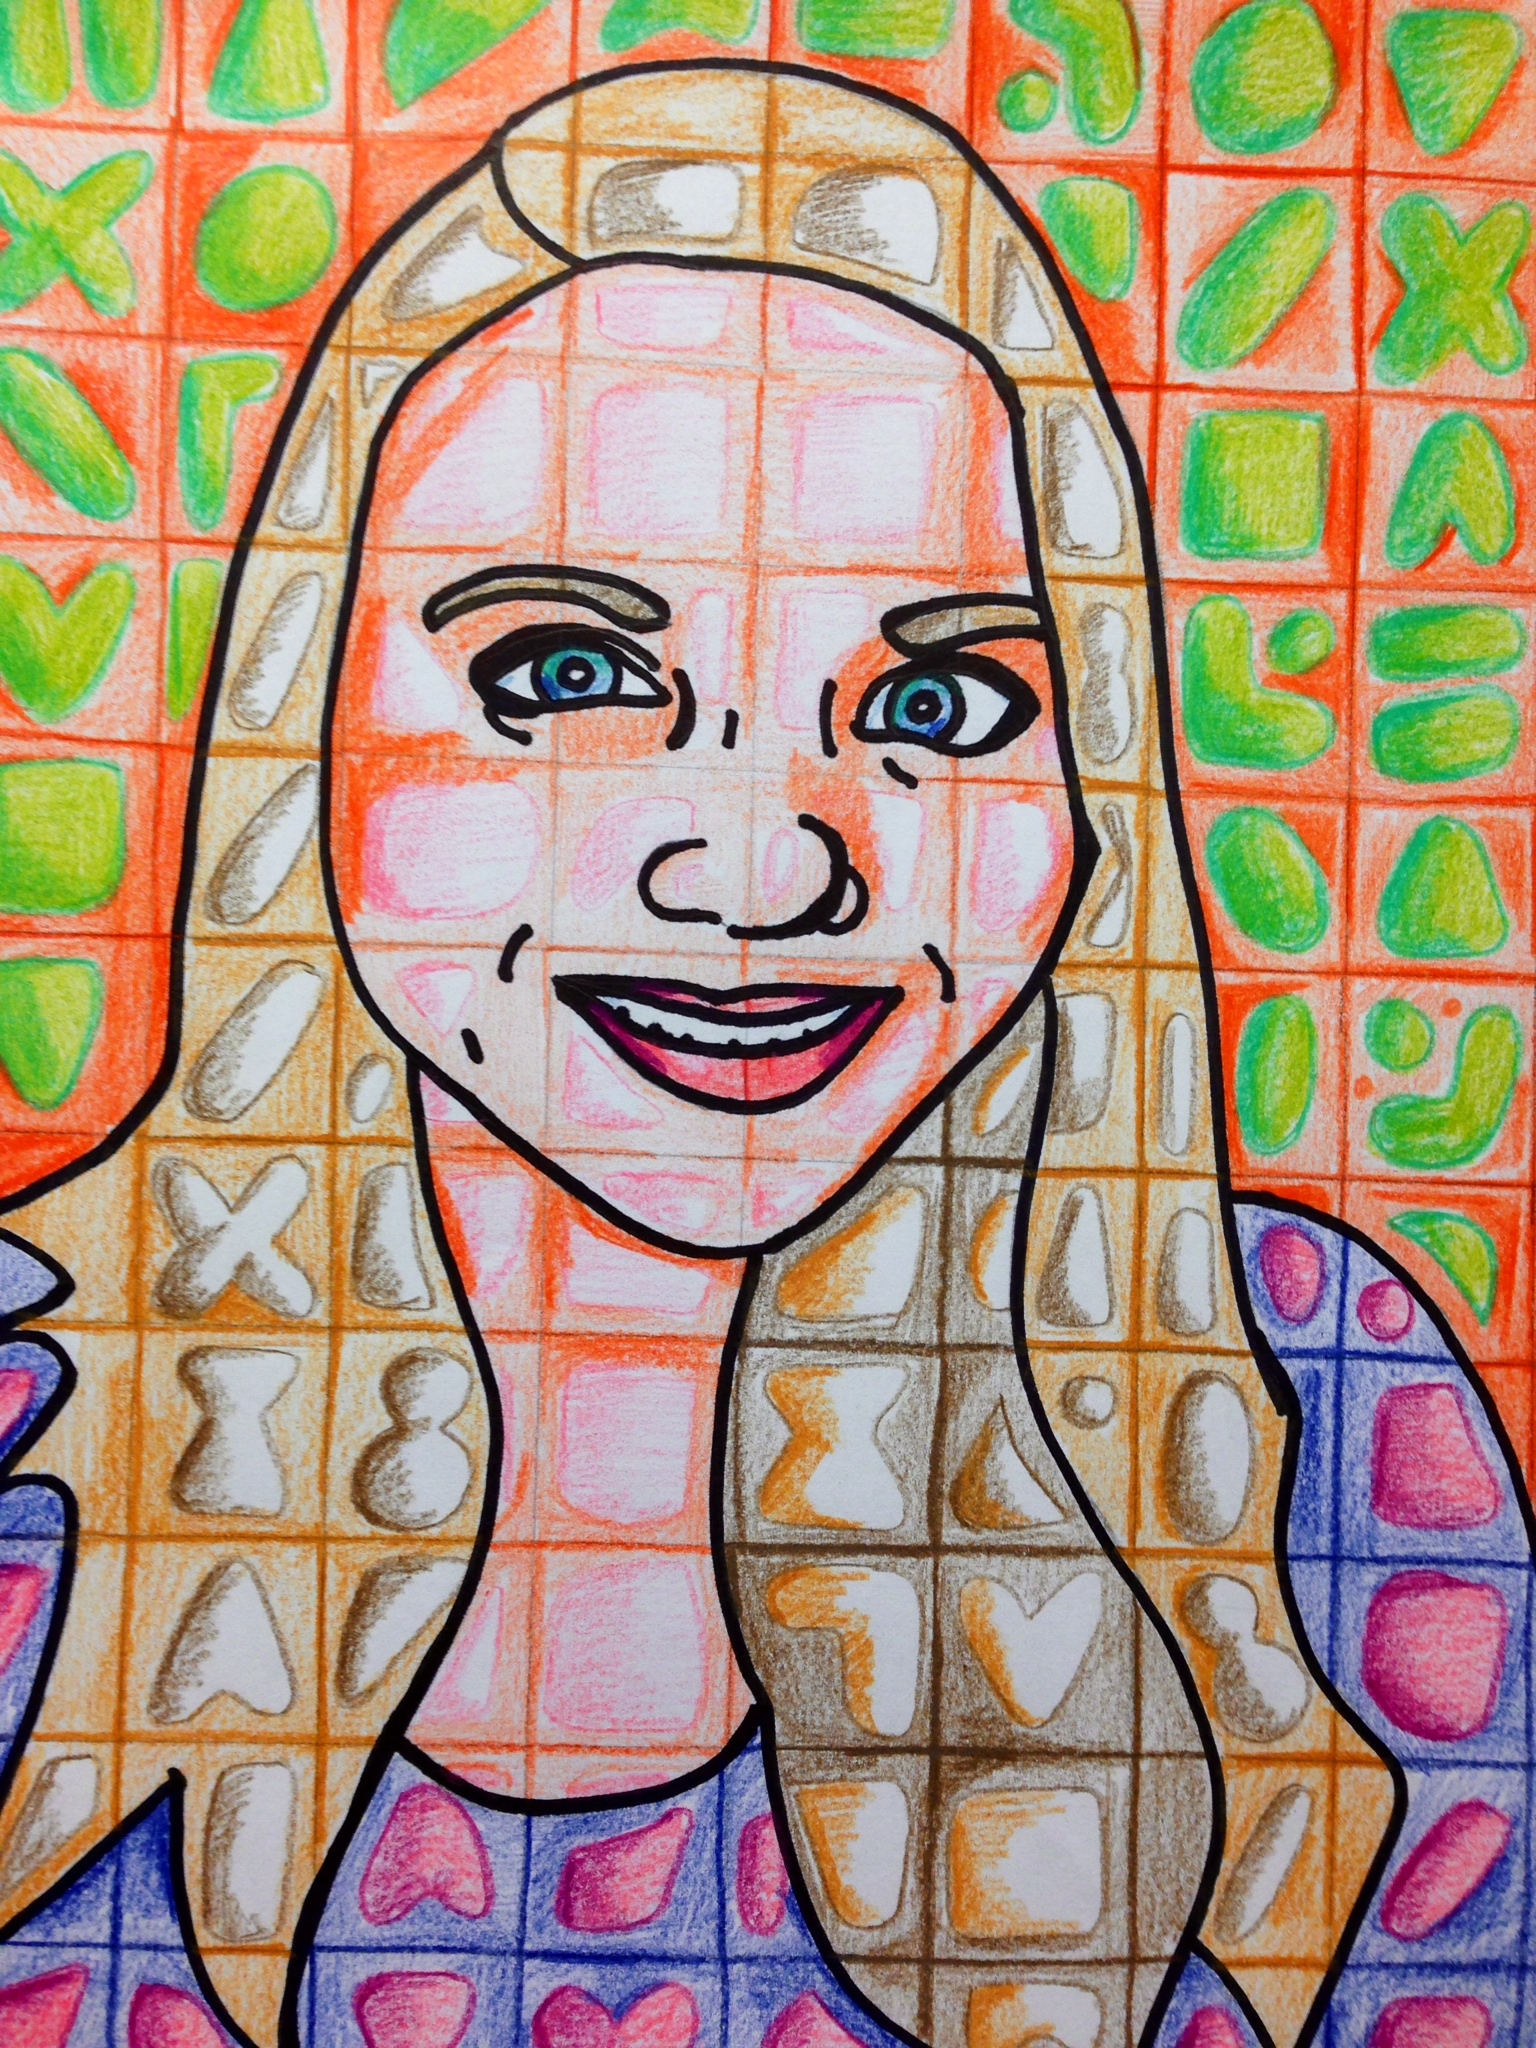 Grid-style portrait of a young woman drawn in colored pencil